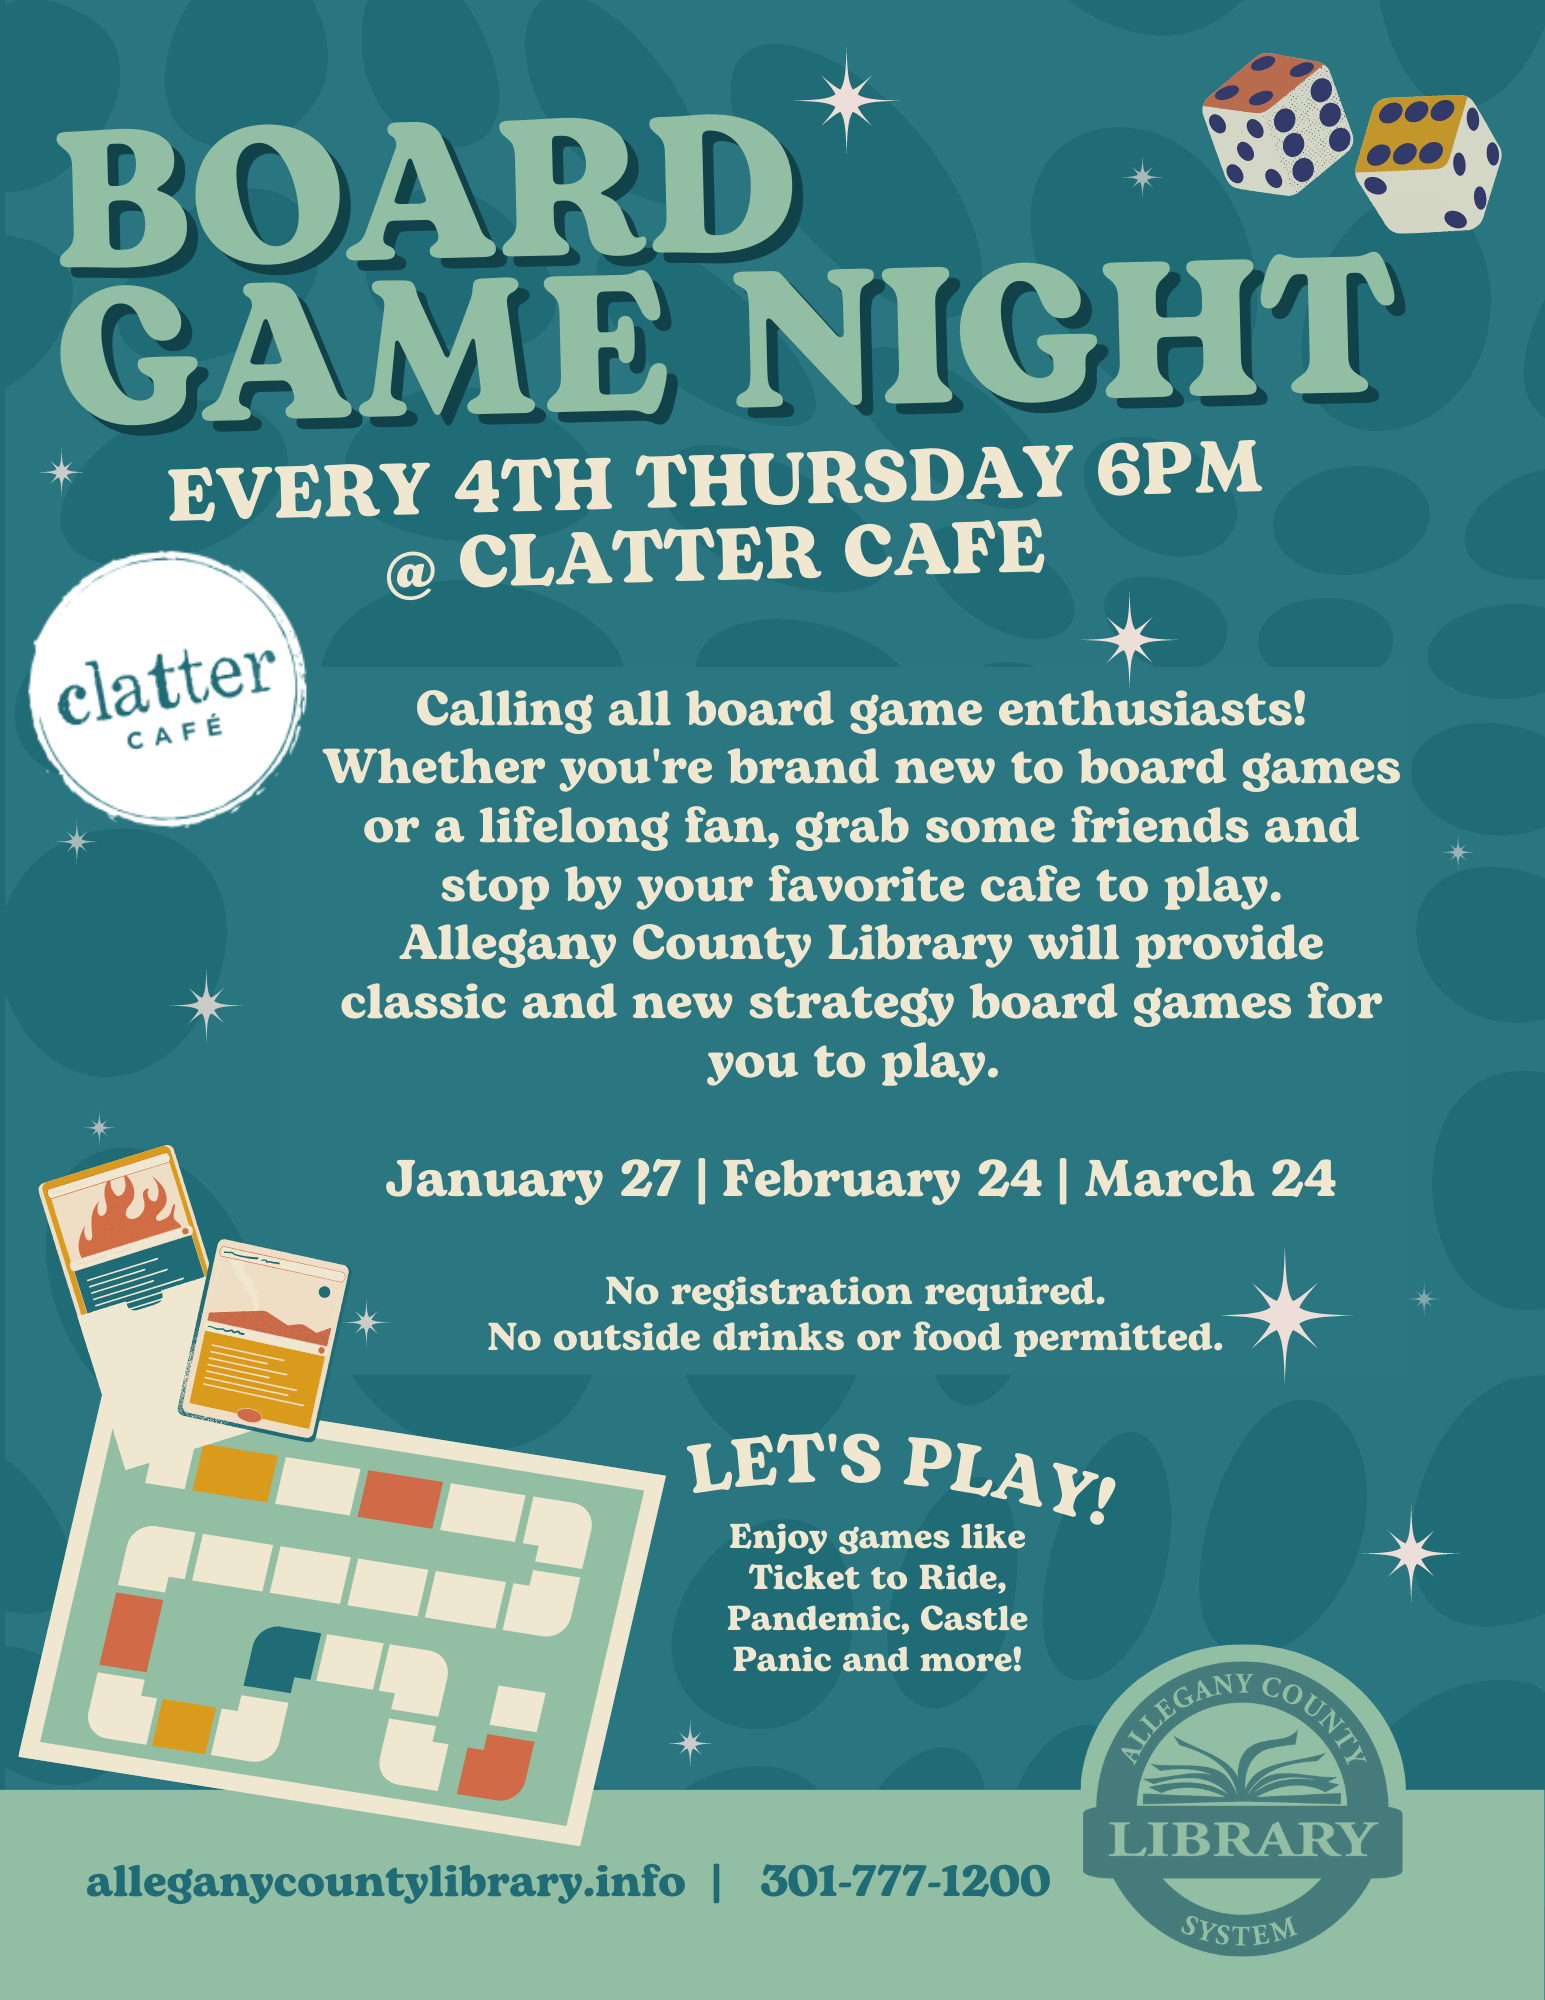 Board Game night details